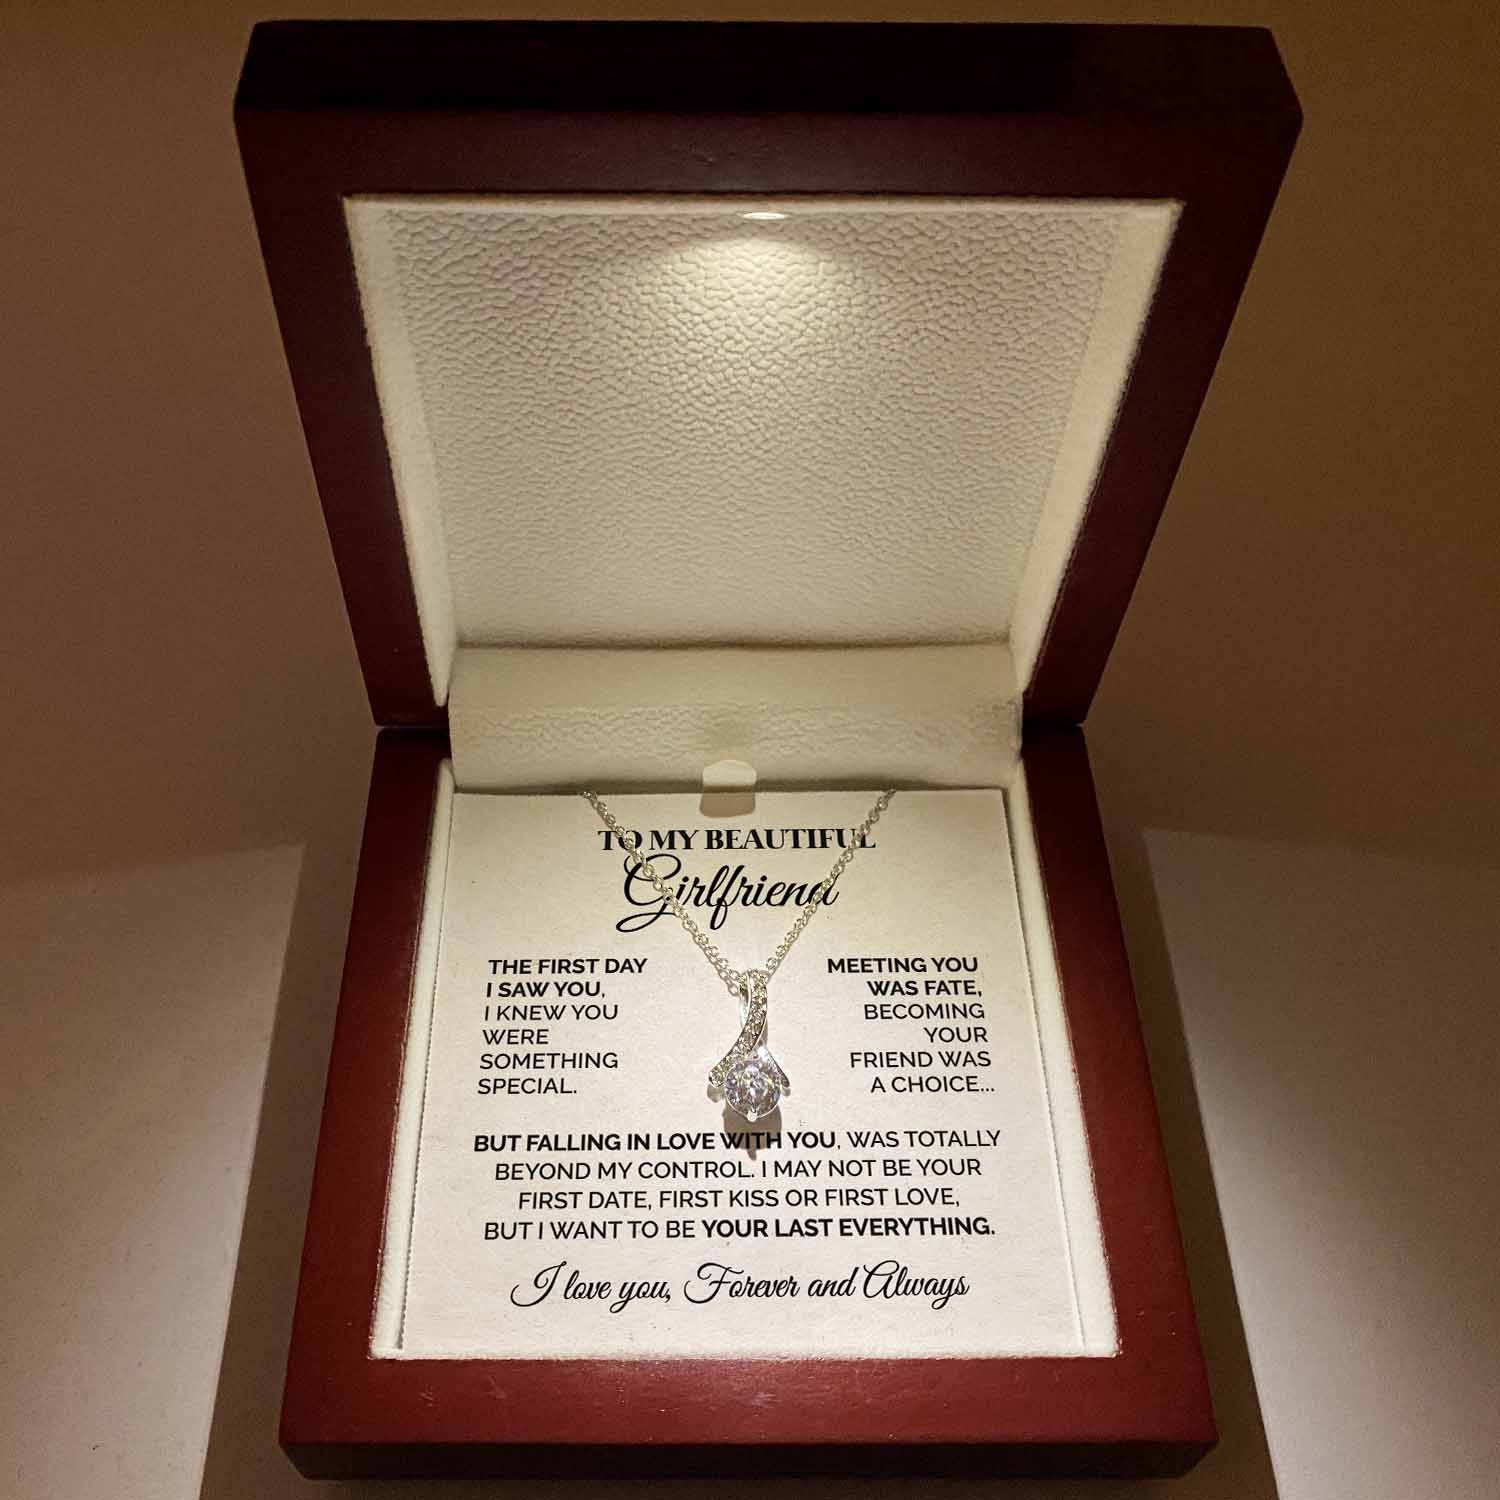 ShineOn Fulfillment Jewelry To My Beautiful Girlfriend - The First Day I Saw You - Ribbon Necklace